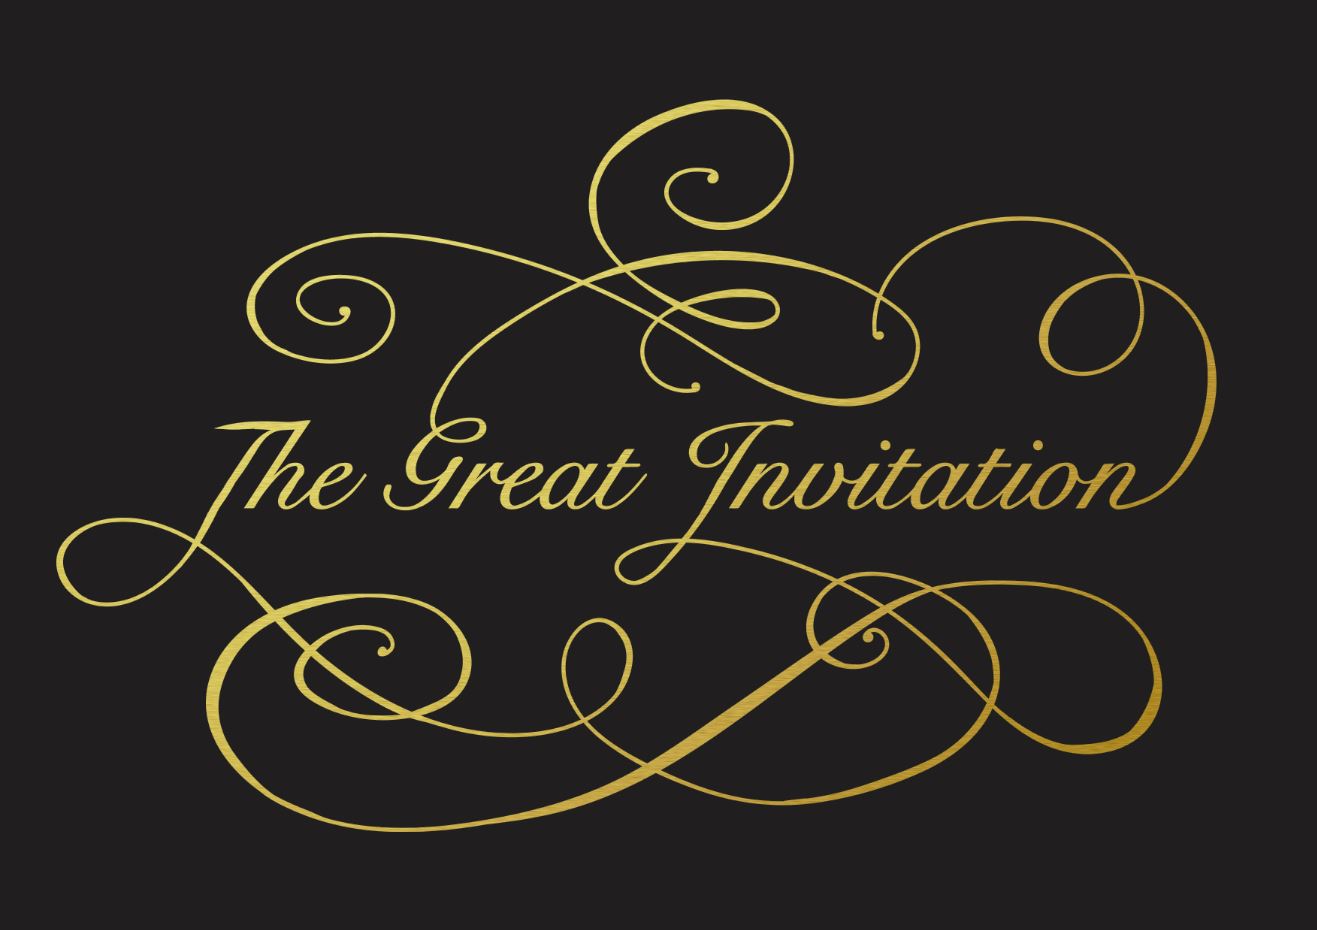 Paul Summers - The Great Invitation  - Come! Drink! Eat! Live! - 06.03.2016